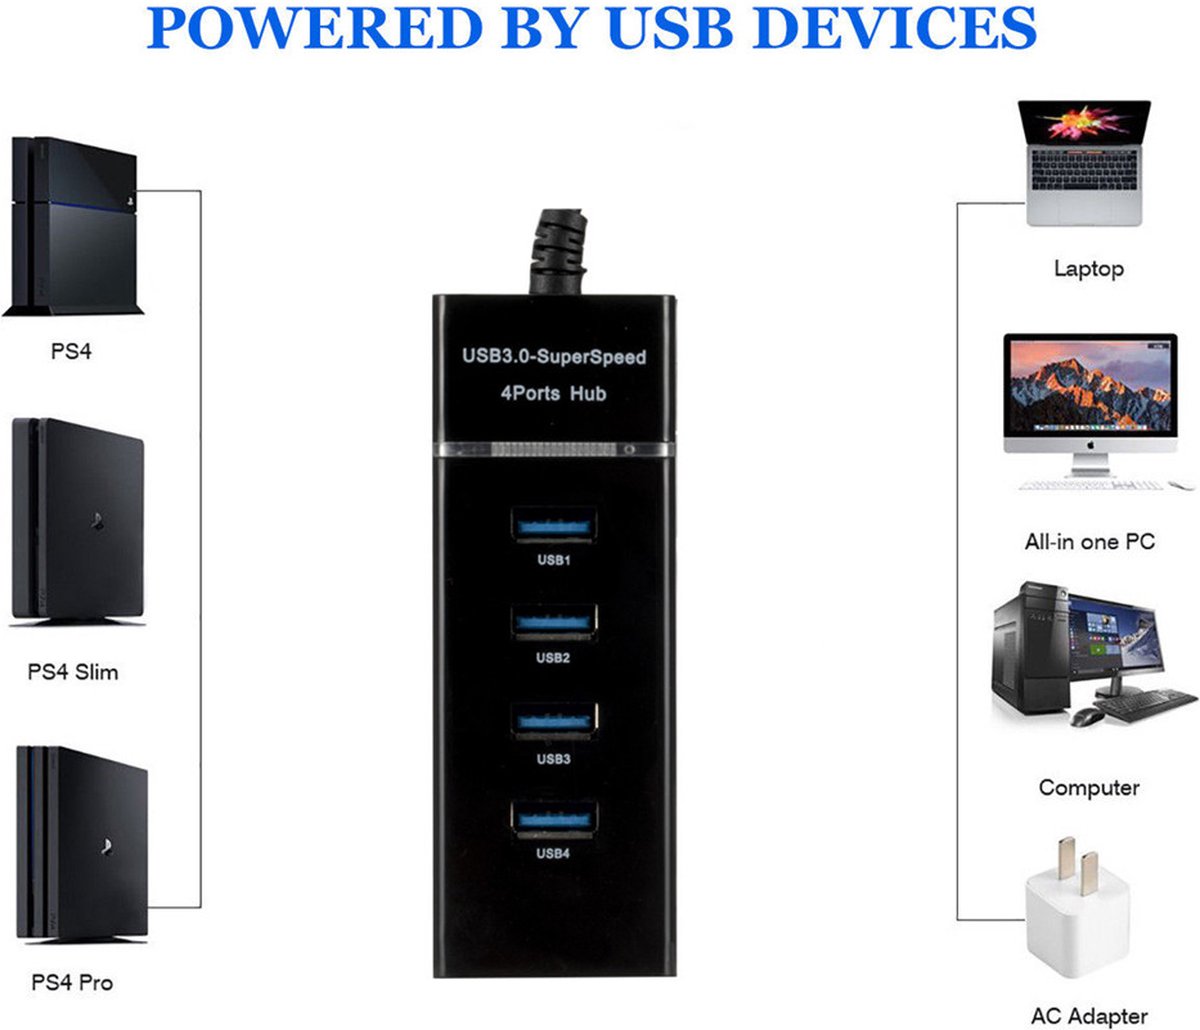 Usb 3.0 Hub voor Ps4/Ps5 - Xbox one - PC - 4 ports - Ps4 slim/Ps4 pro